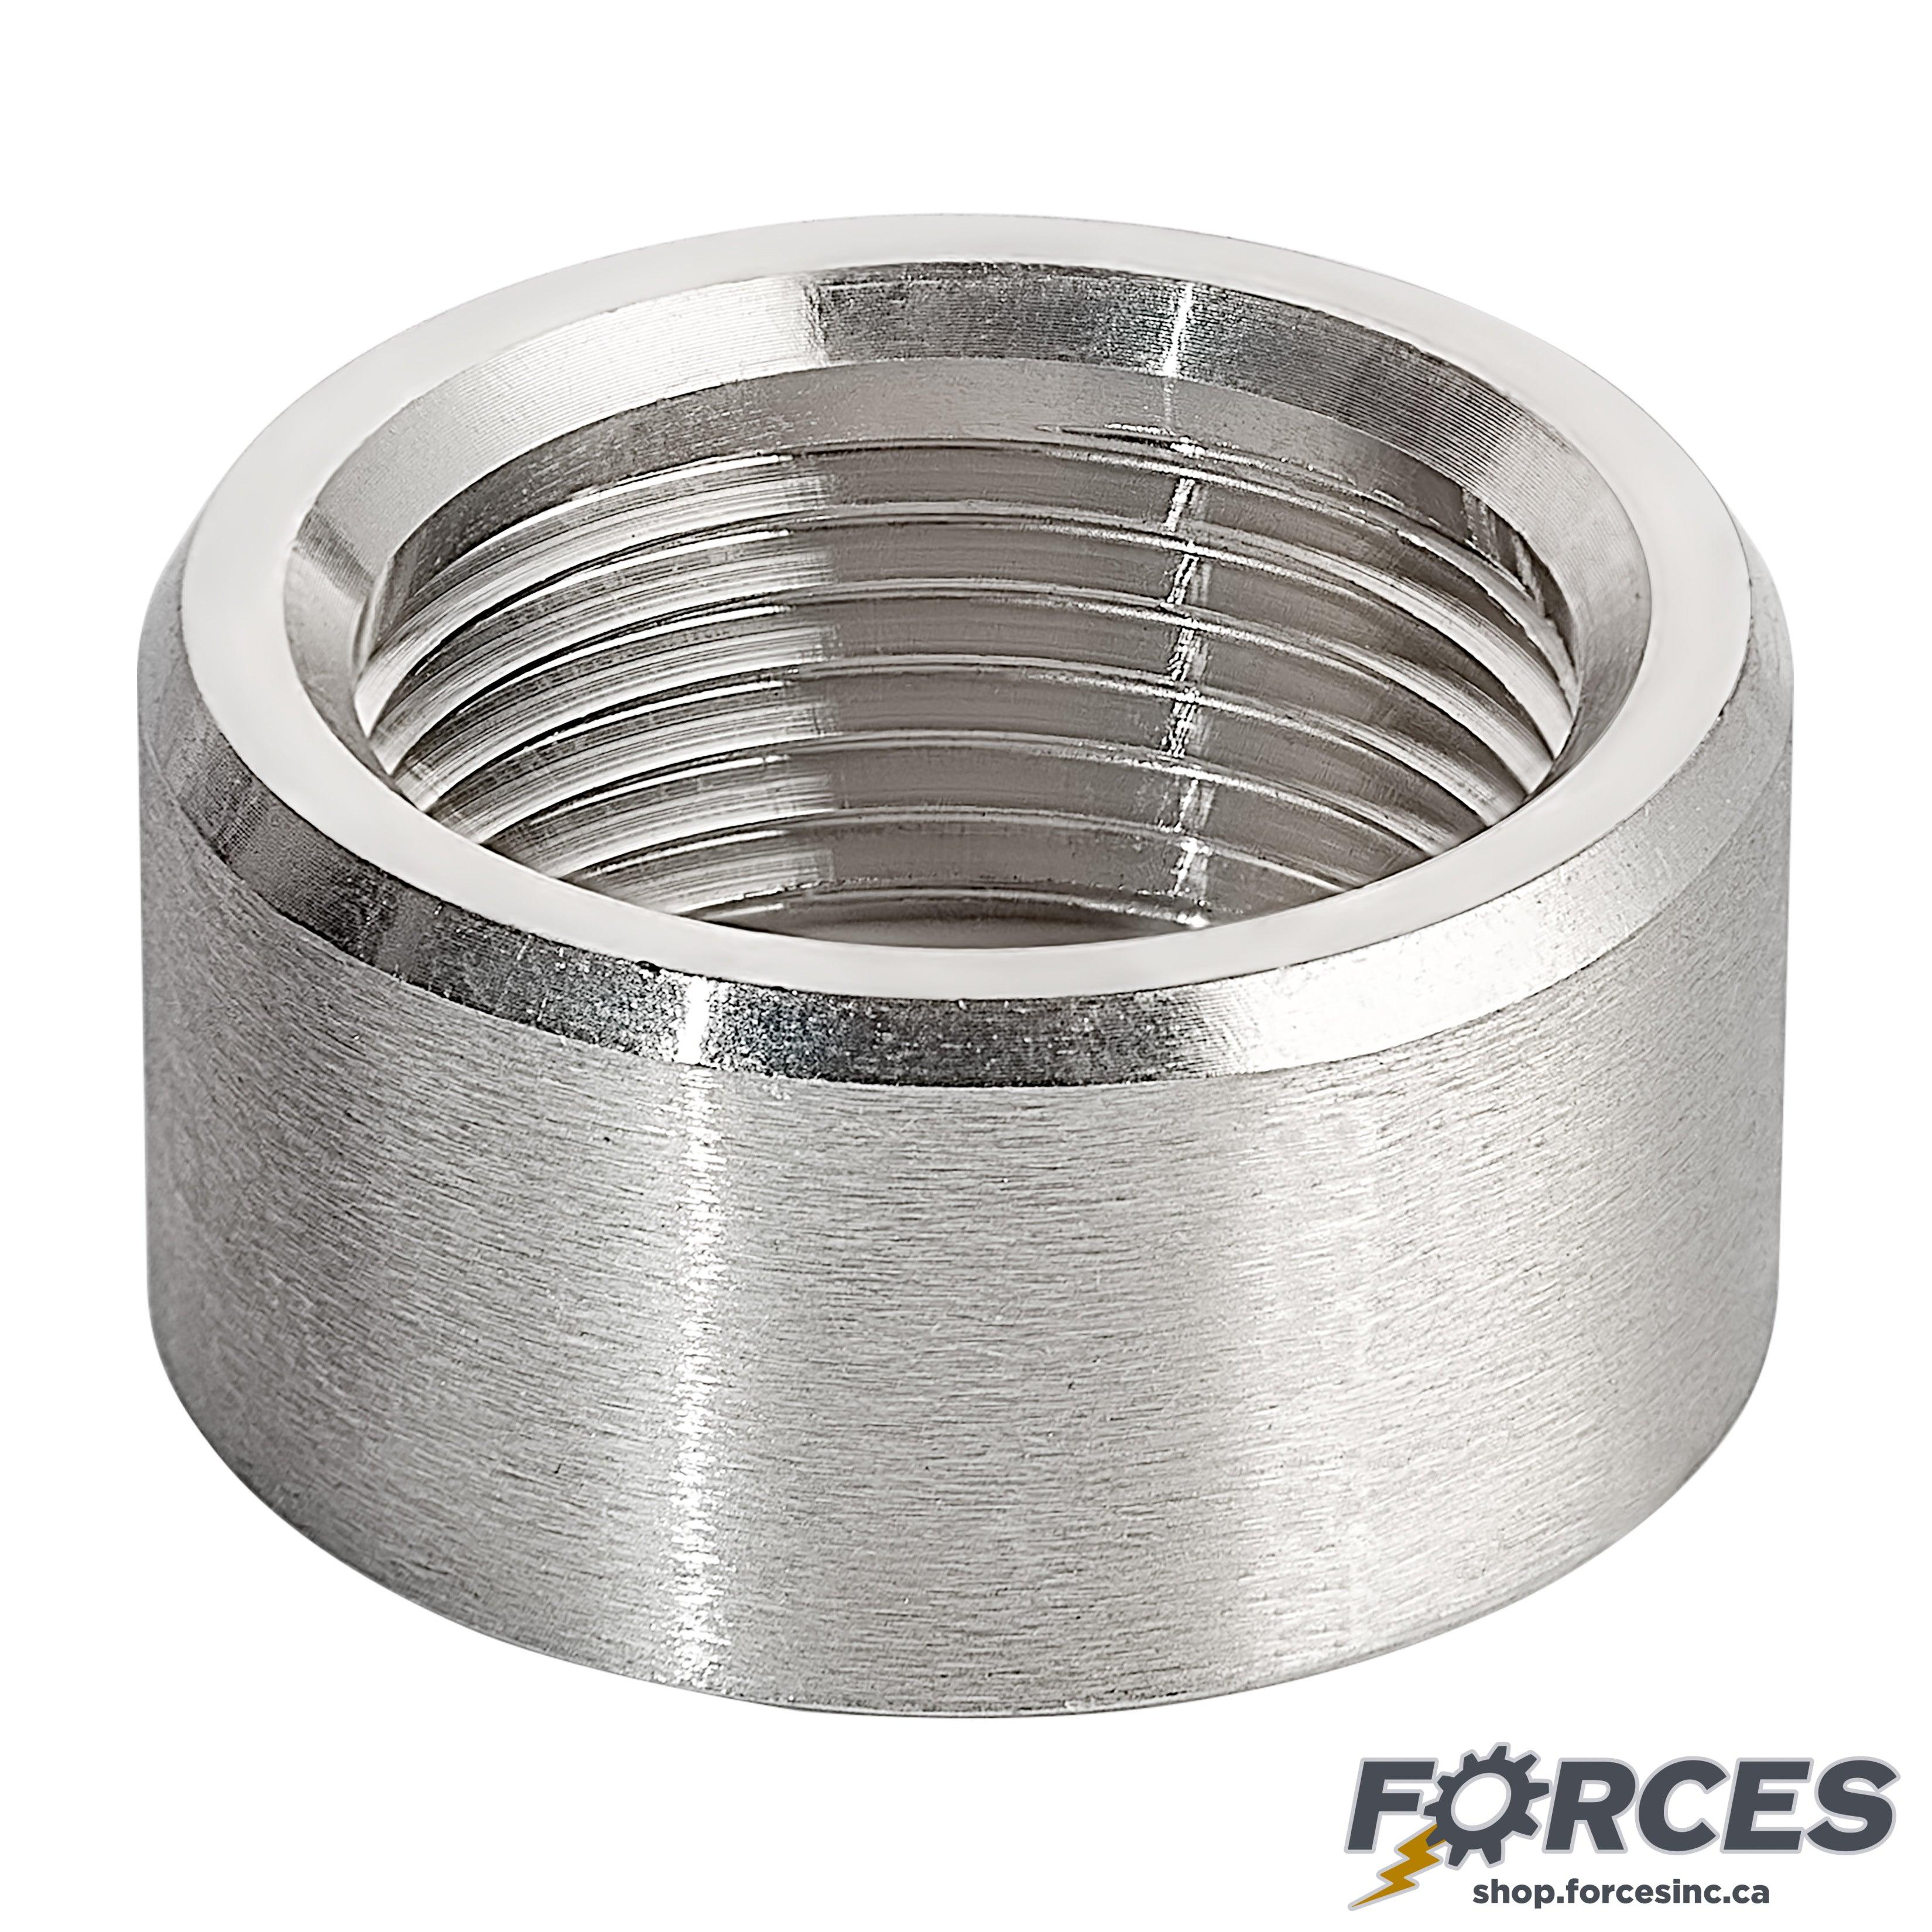 1-1/4" Half-Coupling NPT #150 - Stainless Steel 316 - Forces Inc